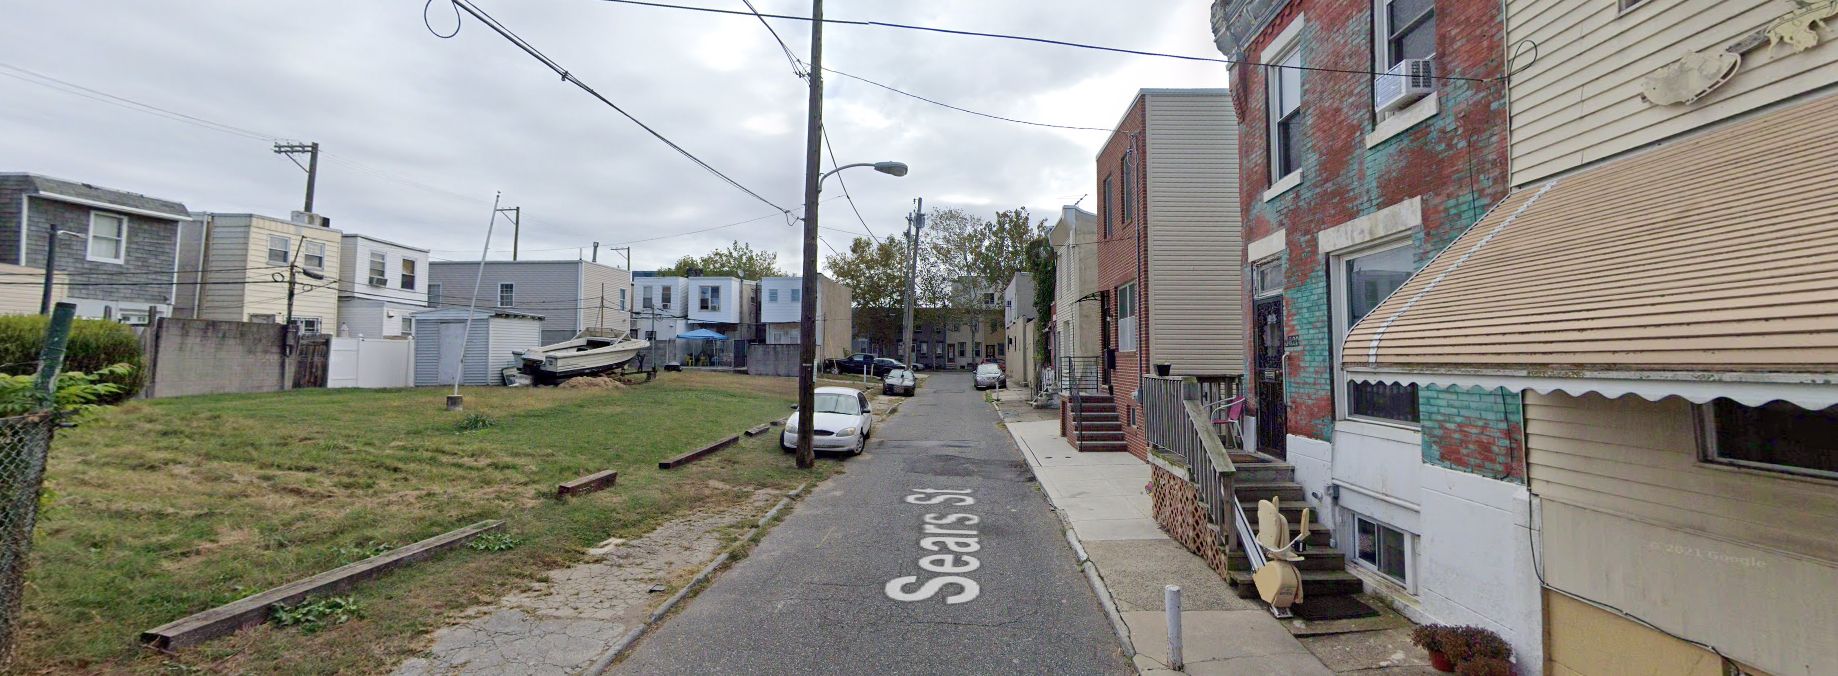 Sears Street, with 3618 Sears Street on the right. Site conditions prior to redevelopment. Looking east. October 2019. Credit: Google Maps